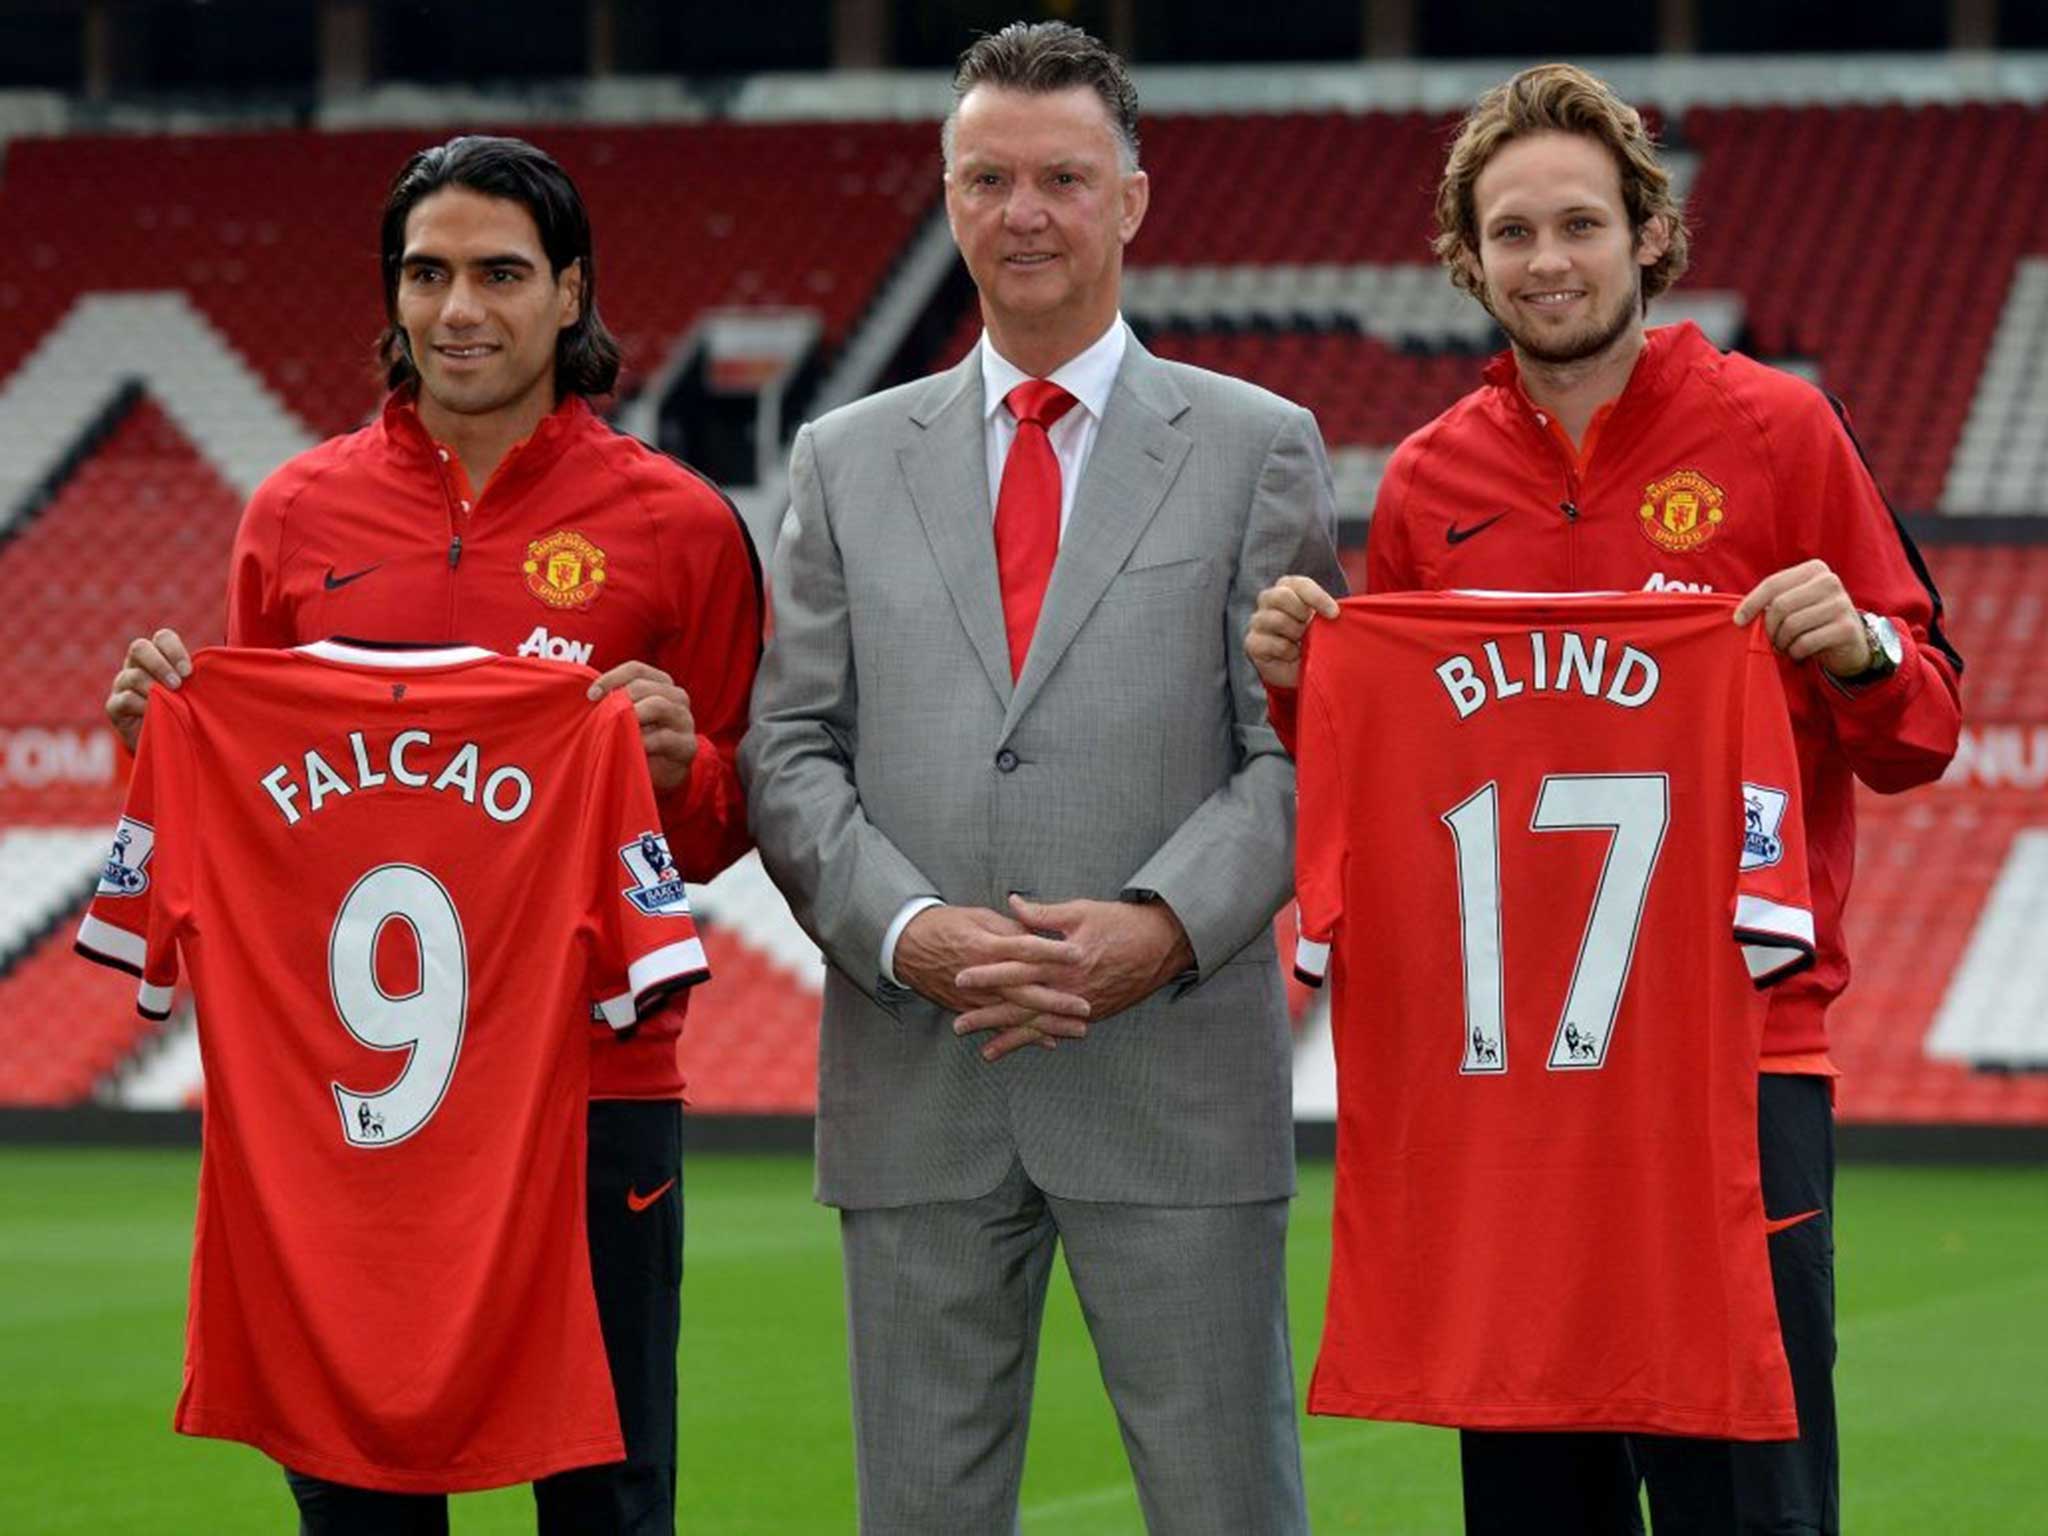 Van Gaal with his new players